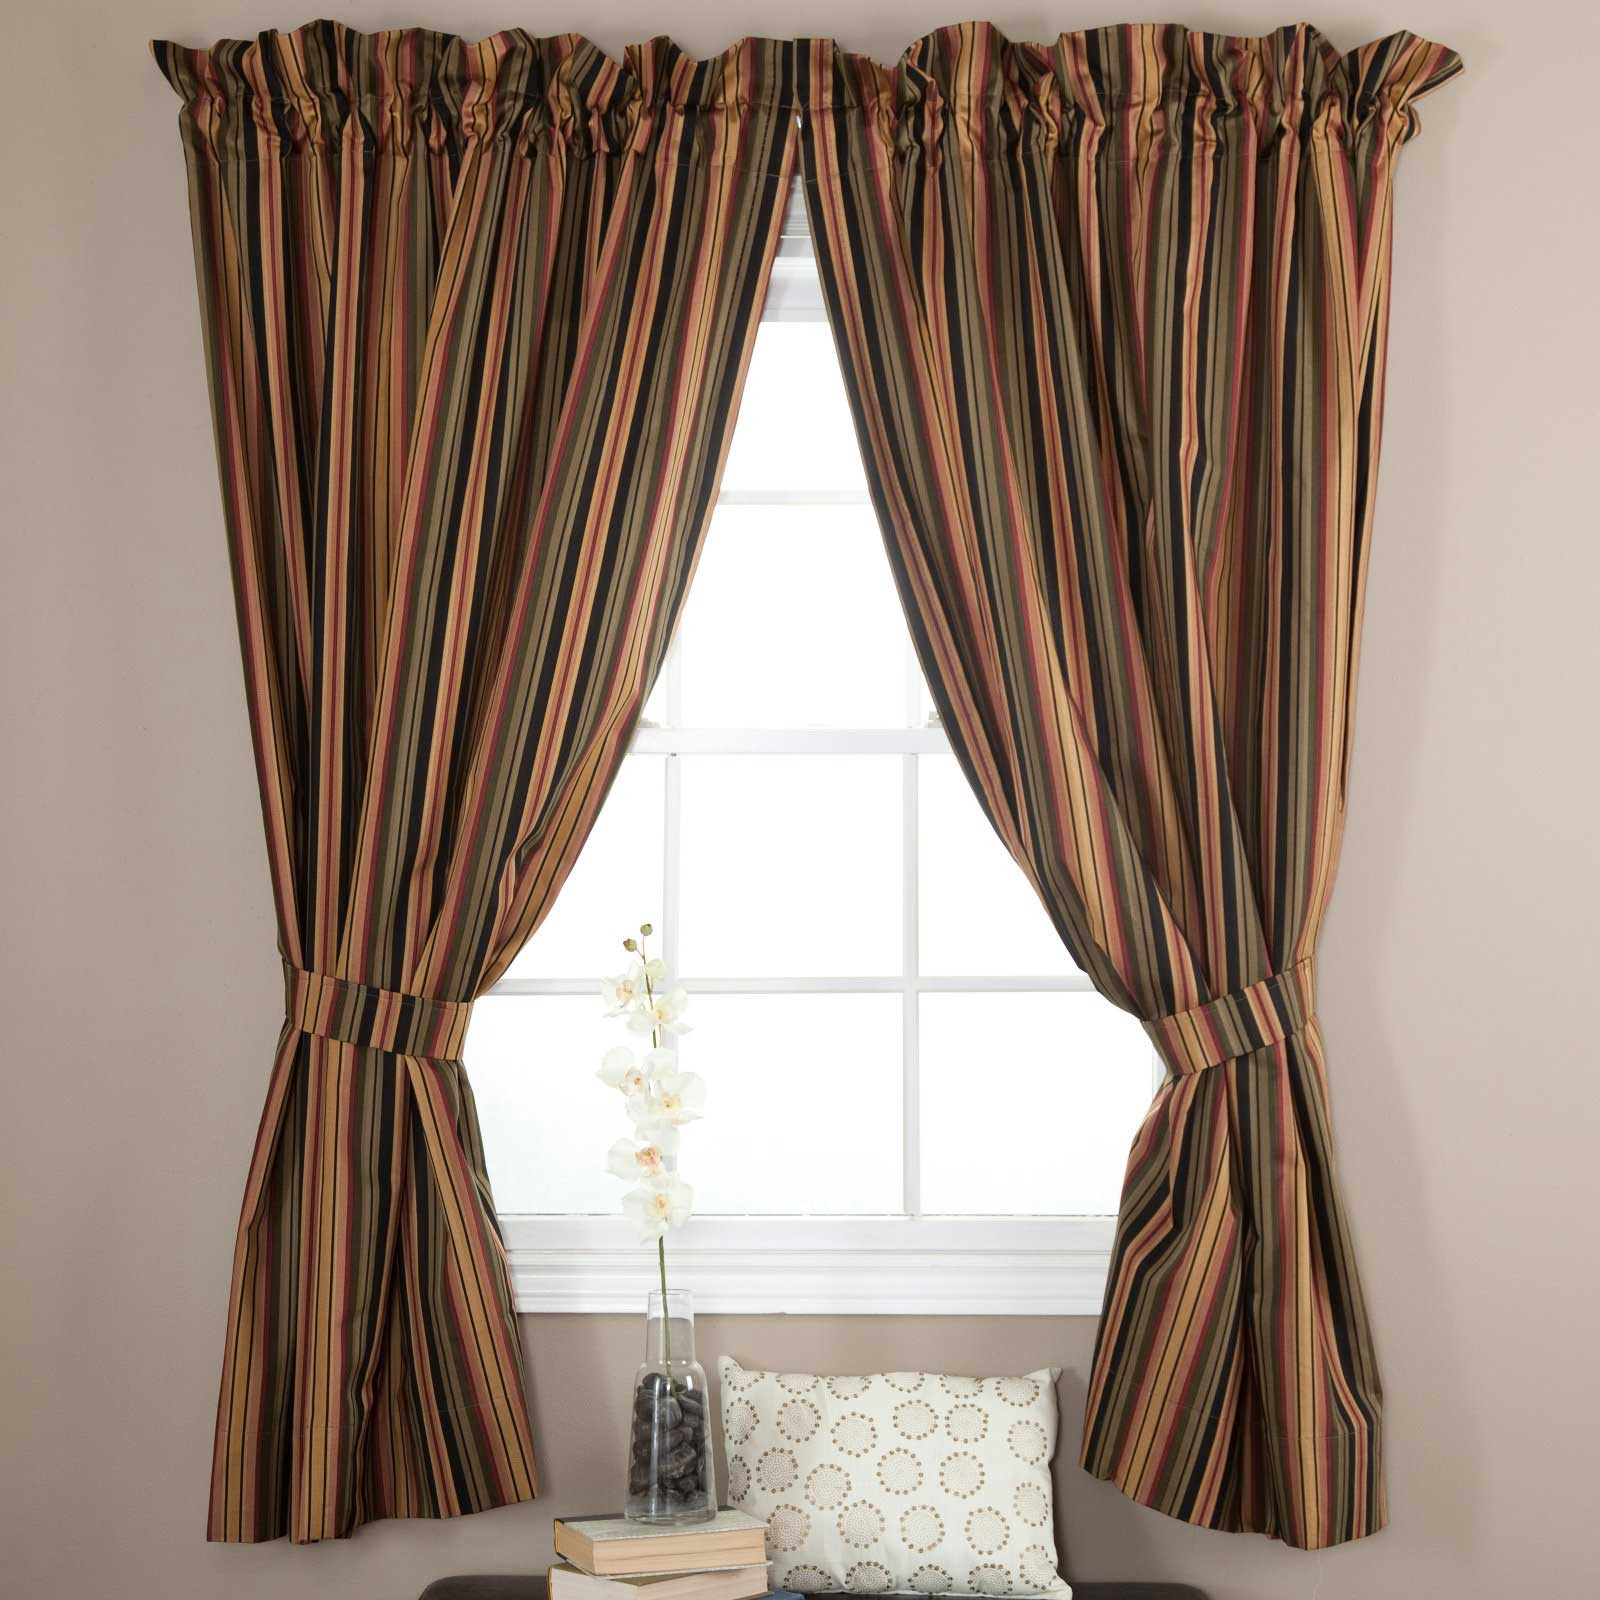 Tuscany Kitchen Curtains
 Tuscany Kitchen Curtains Where to Buy Kitchen